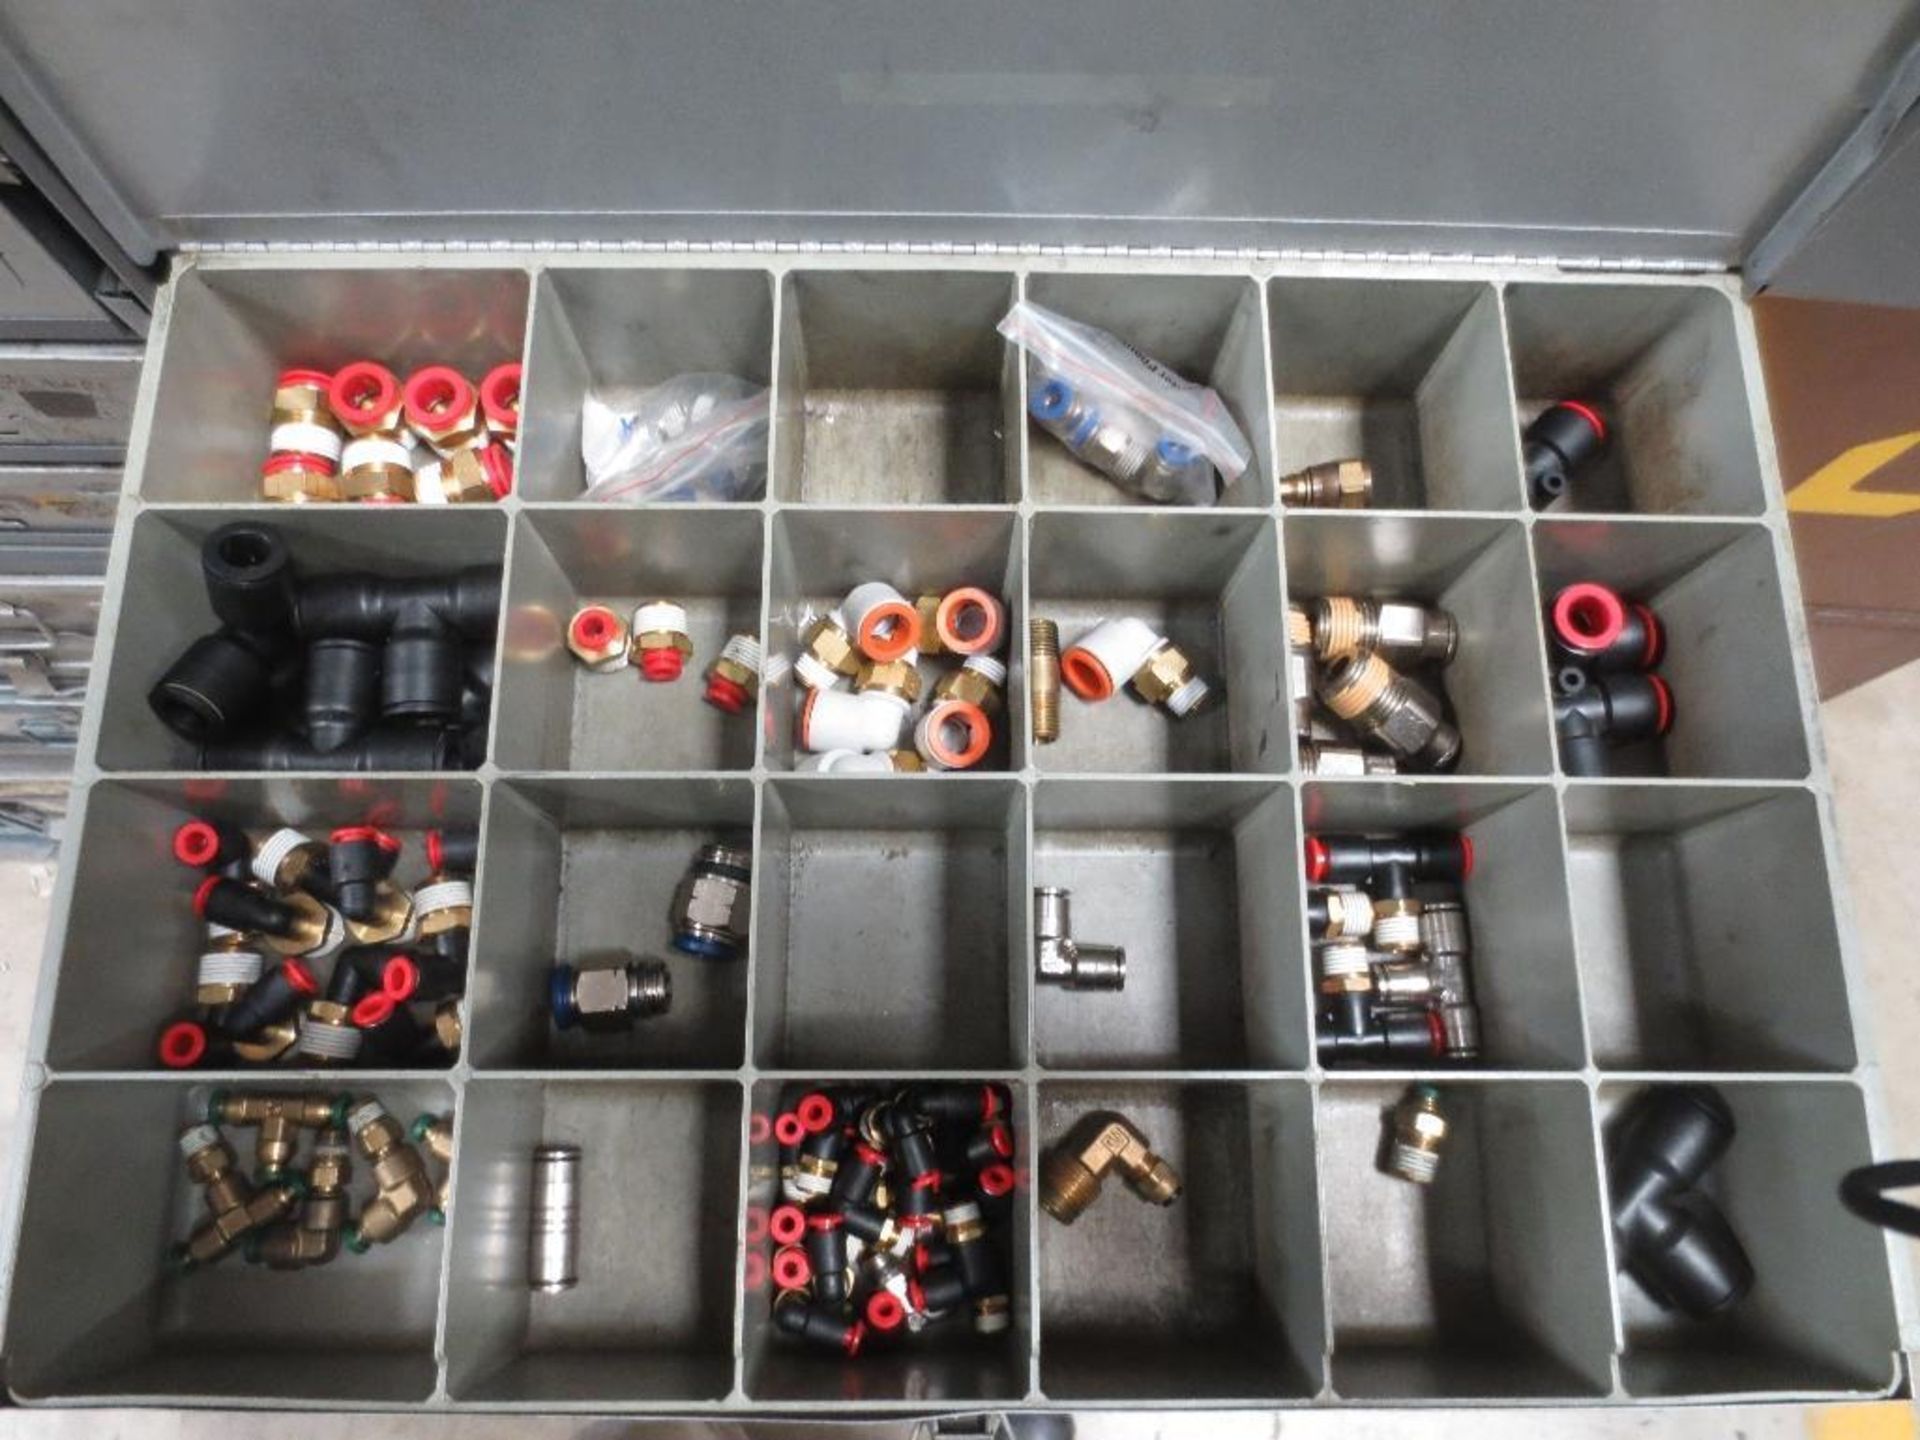 Six Four Drawer Compartment Cabinets With Misc. Contents Of Screws, Nuts, Bolts - Image 3 of 9